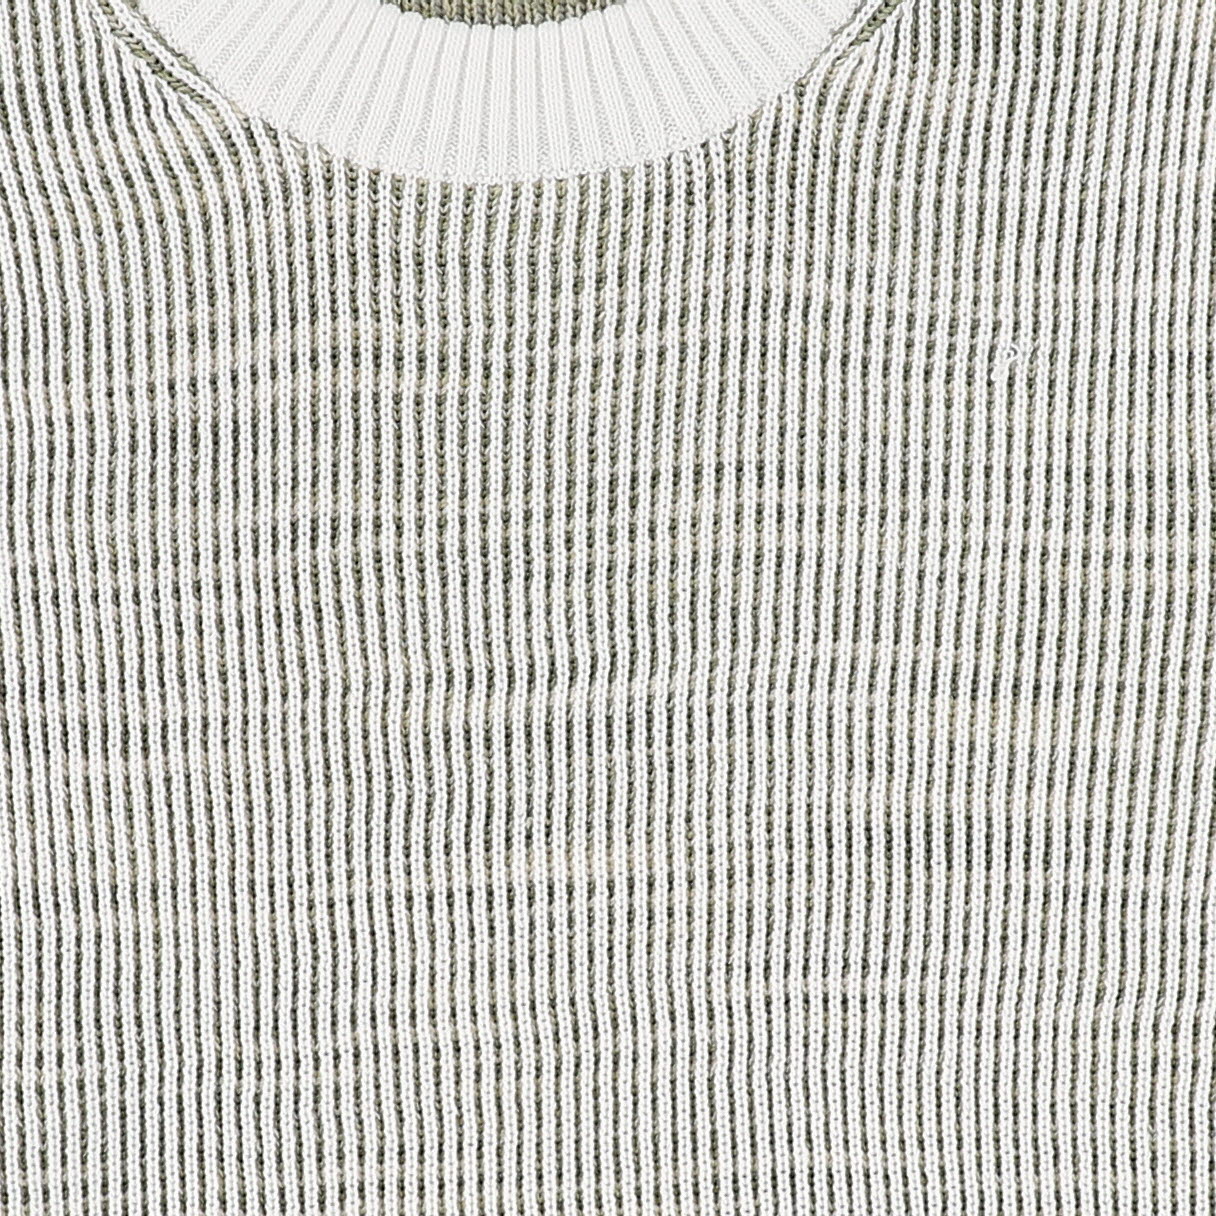 LE BOURDON GREEN OMBRE RIBBED KNIT SWEATER [FINAL SALE]